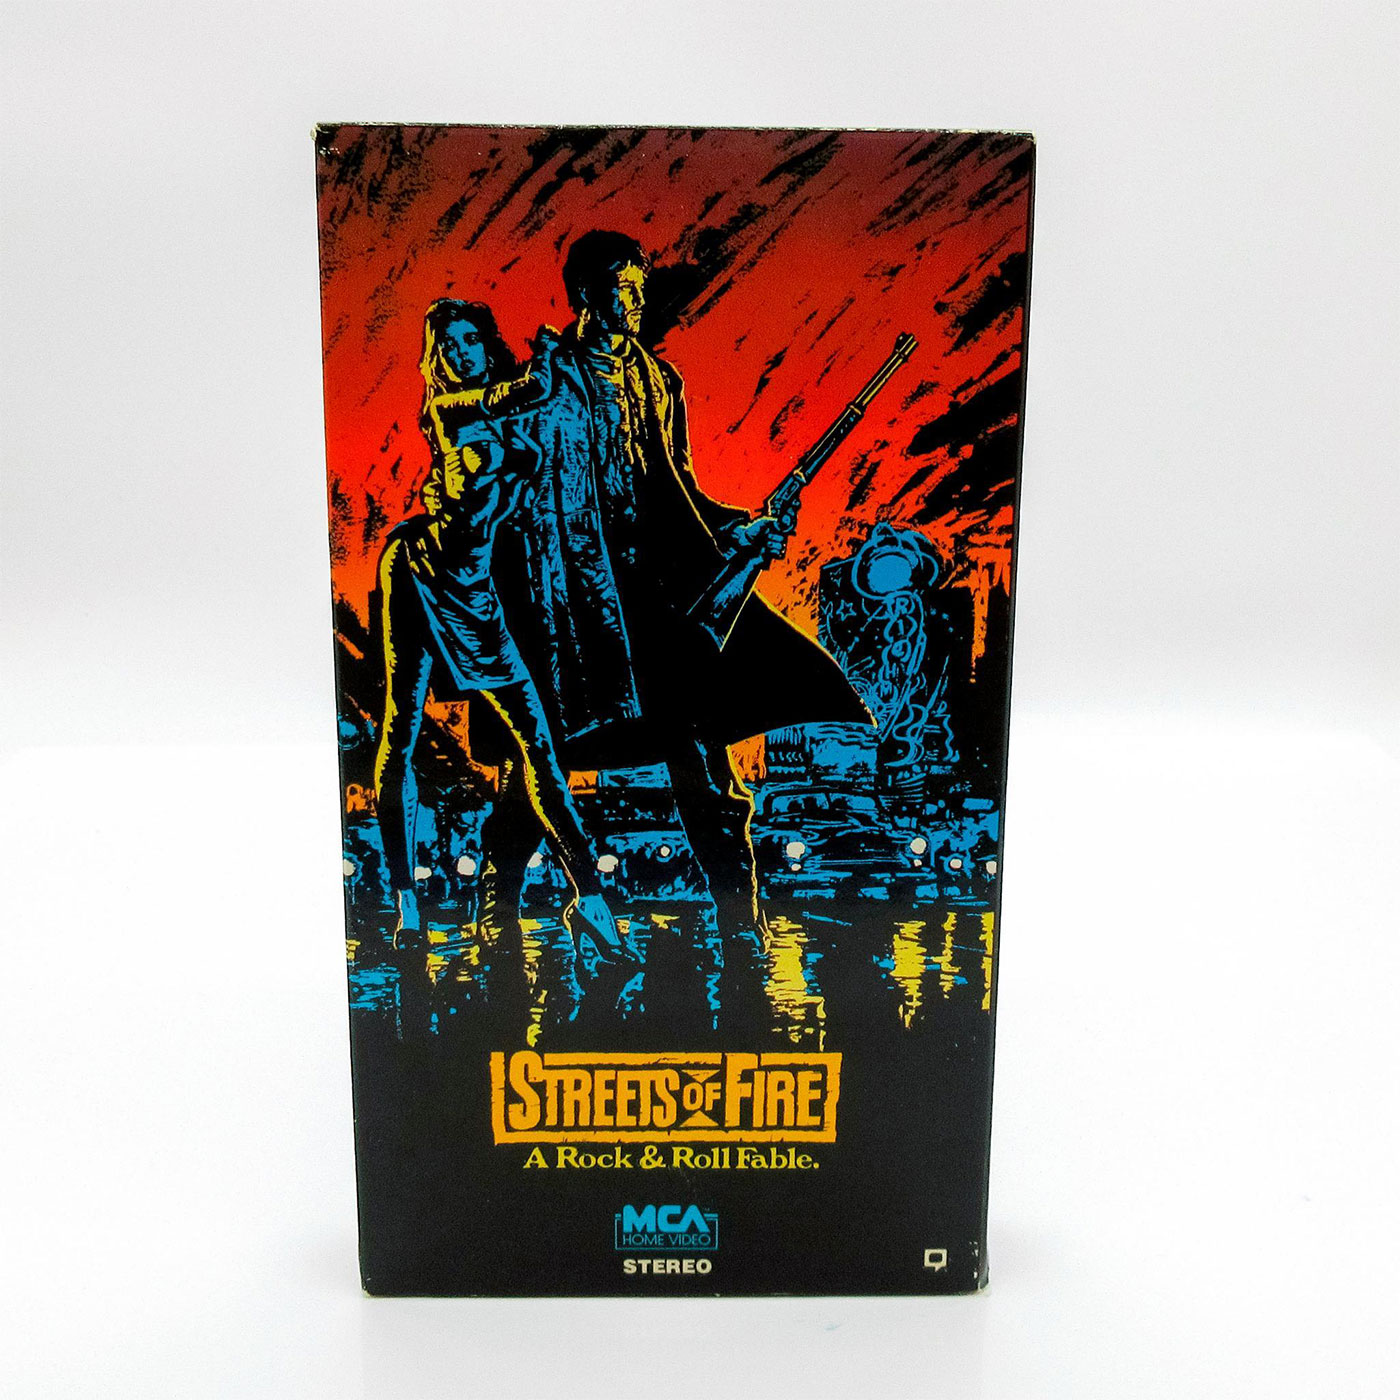 VHS MCA Home Video, Streets of Fire | Lion and Unicorn